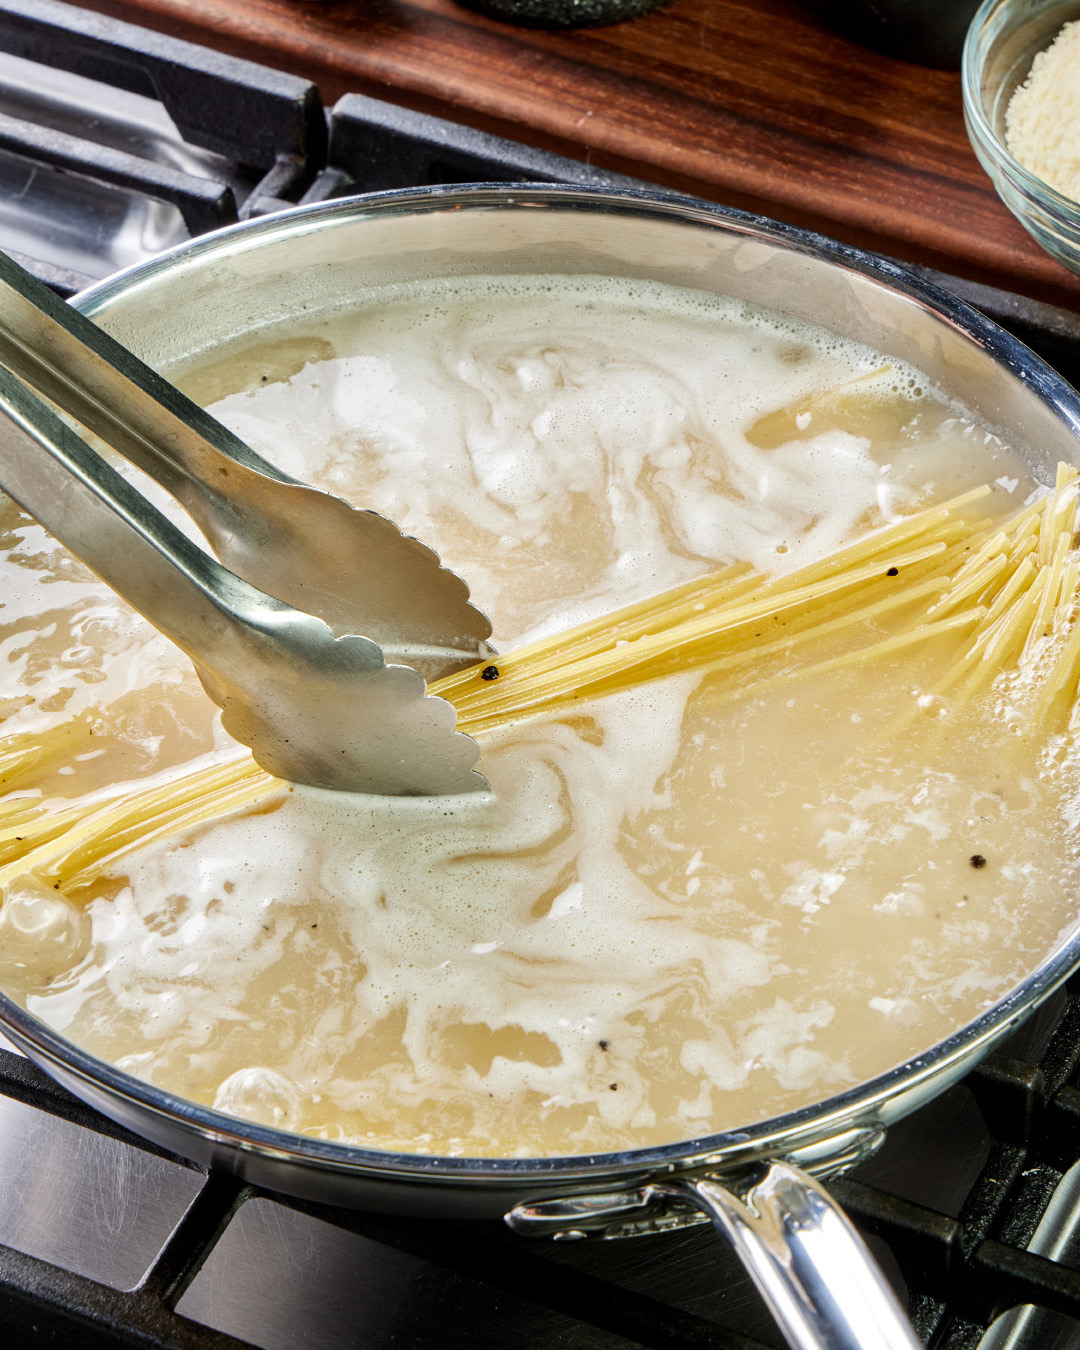 3. Bring to a boil over medium-high and cook, uncovered and frequently moving the pasta about with tongs but keeping it submerged.